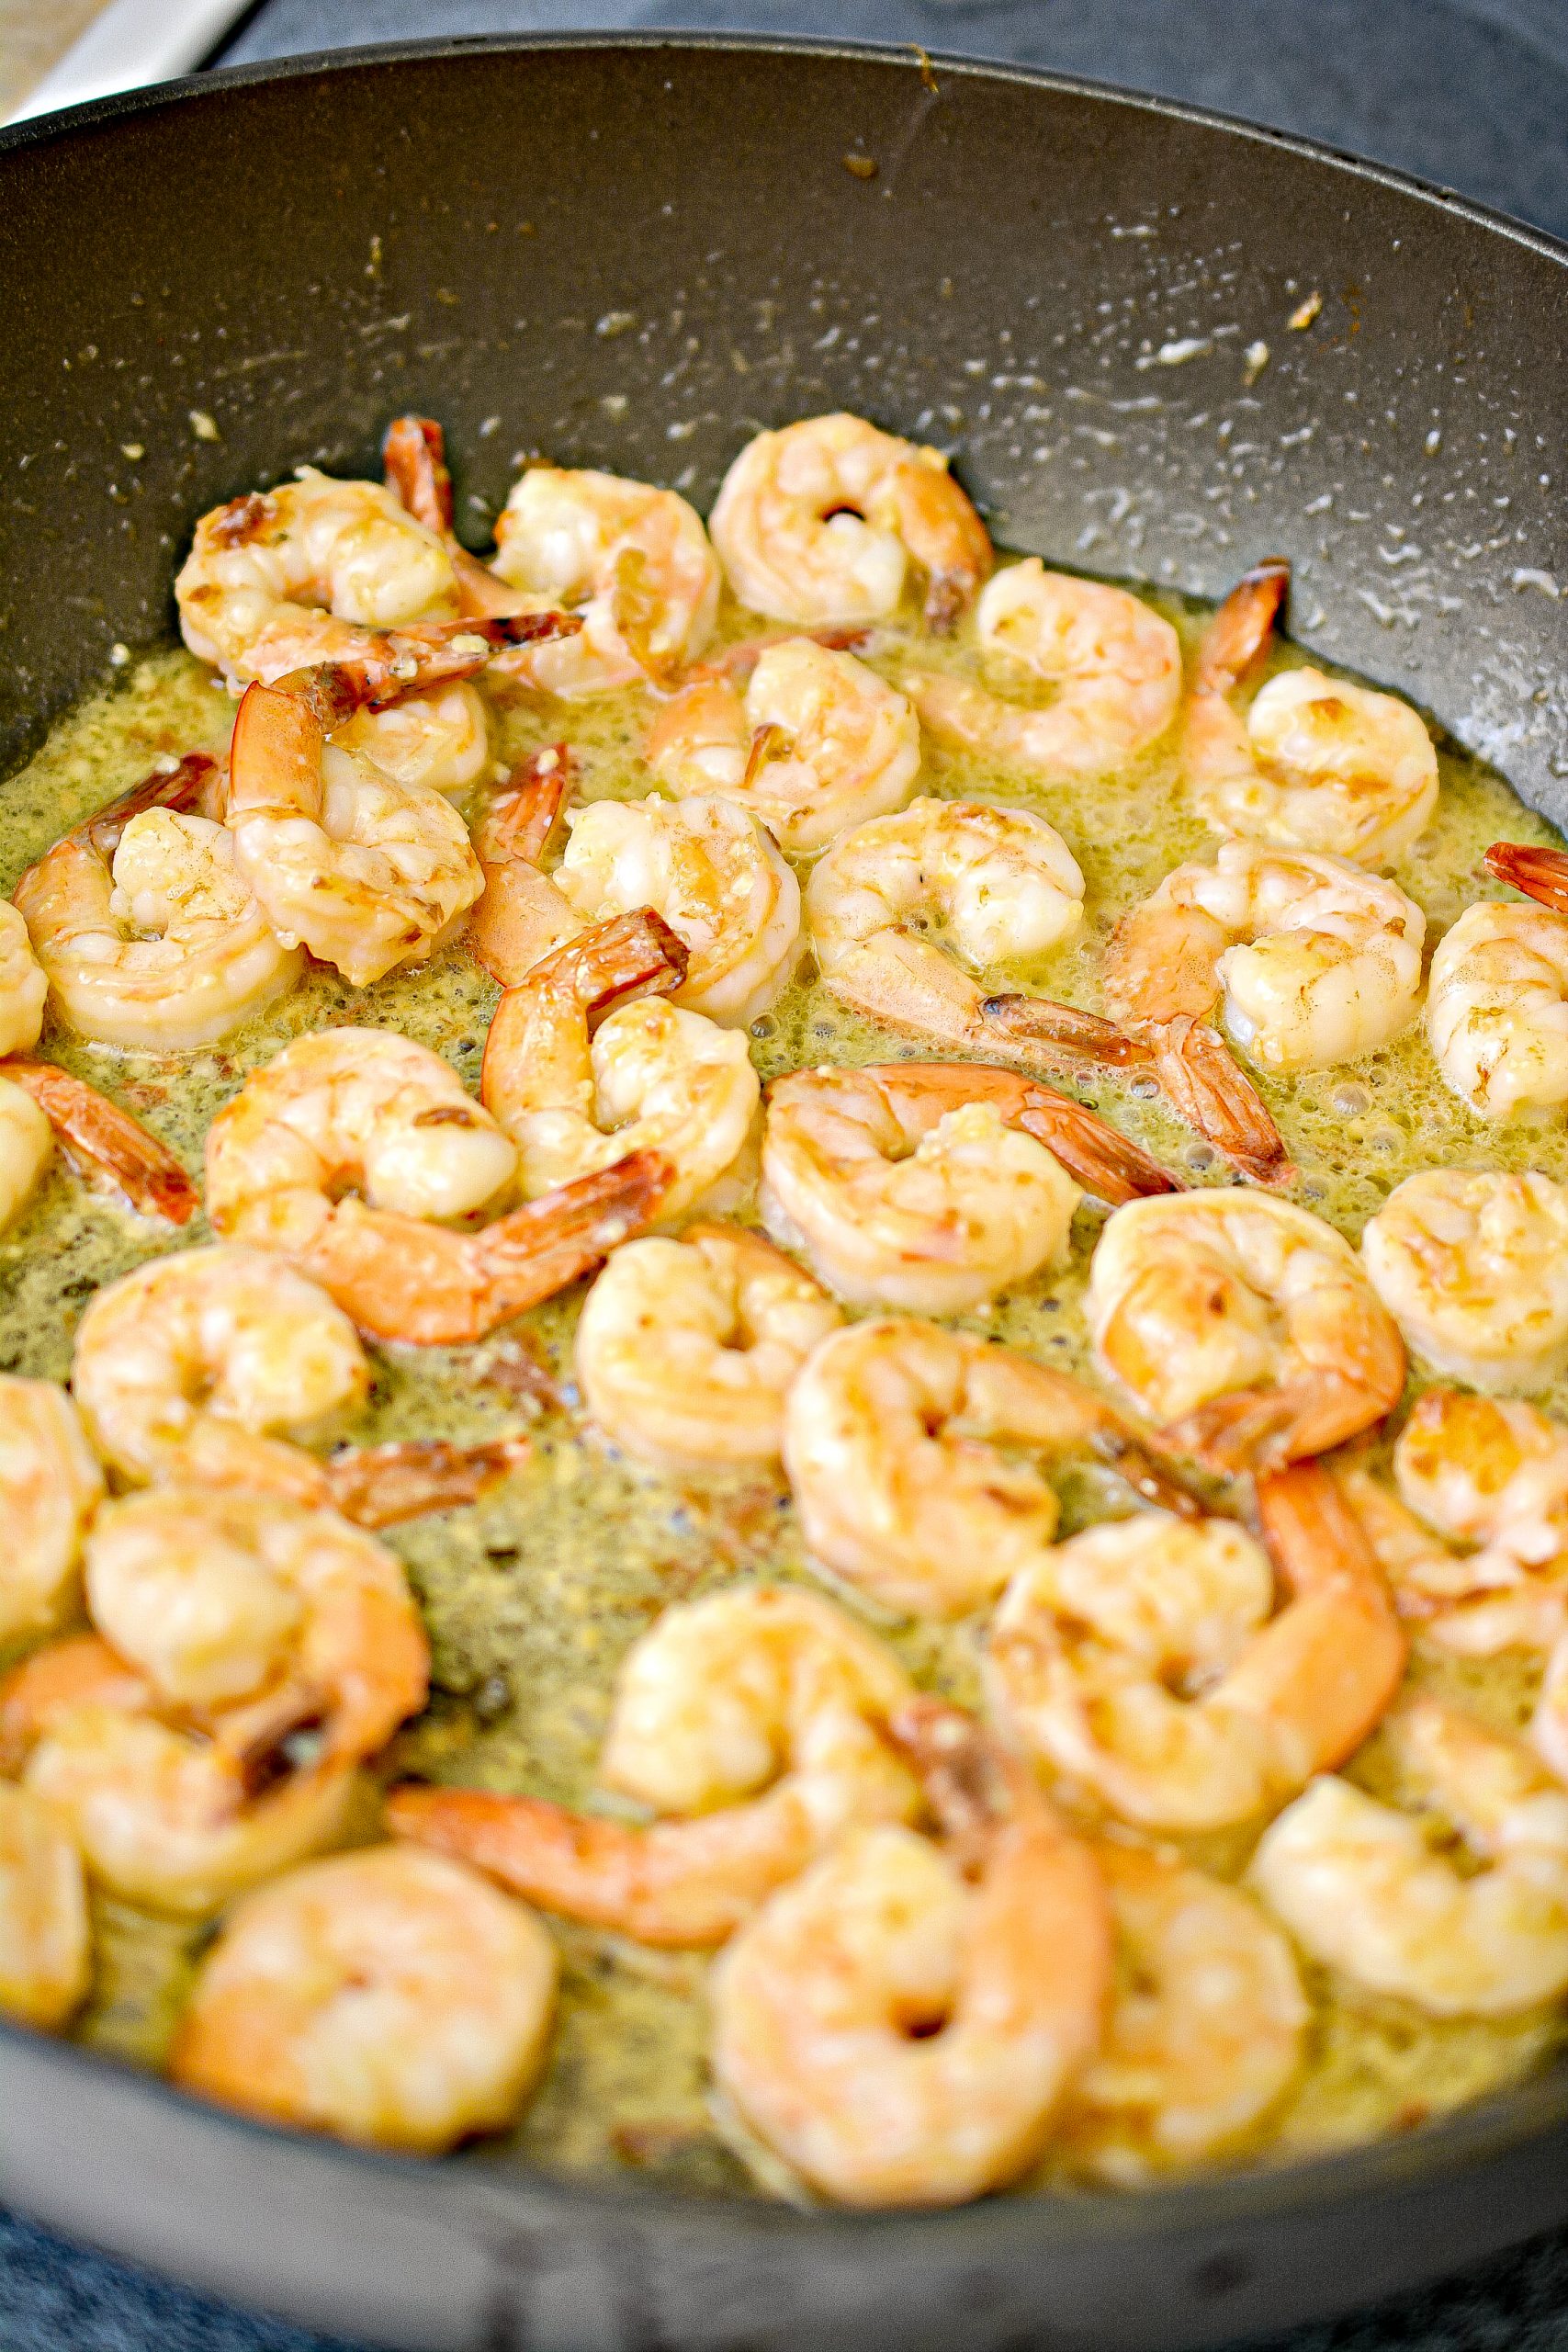 Stir the Italian seasoning into the skillet, and add the shrimp back in. Toss to coat the shrimp well, and saute for another minute or two.